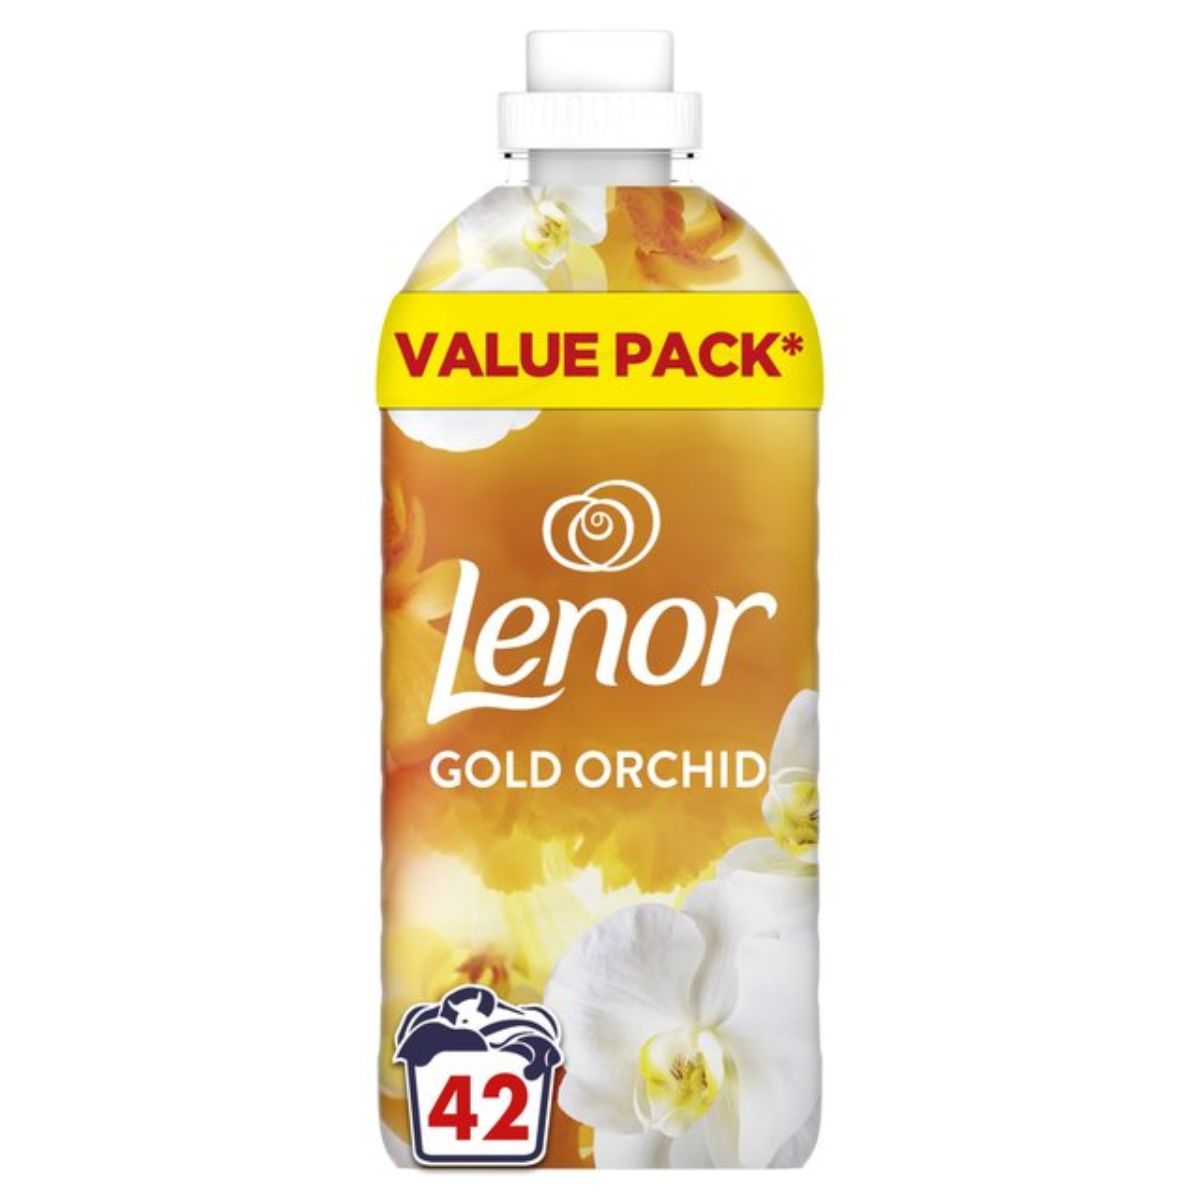 Lenor - Fabric Conditioner Gold Orchid - 42 Washes value pack.